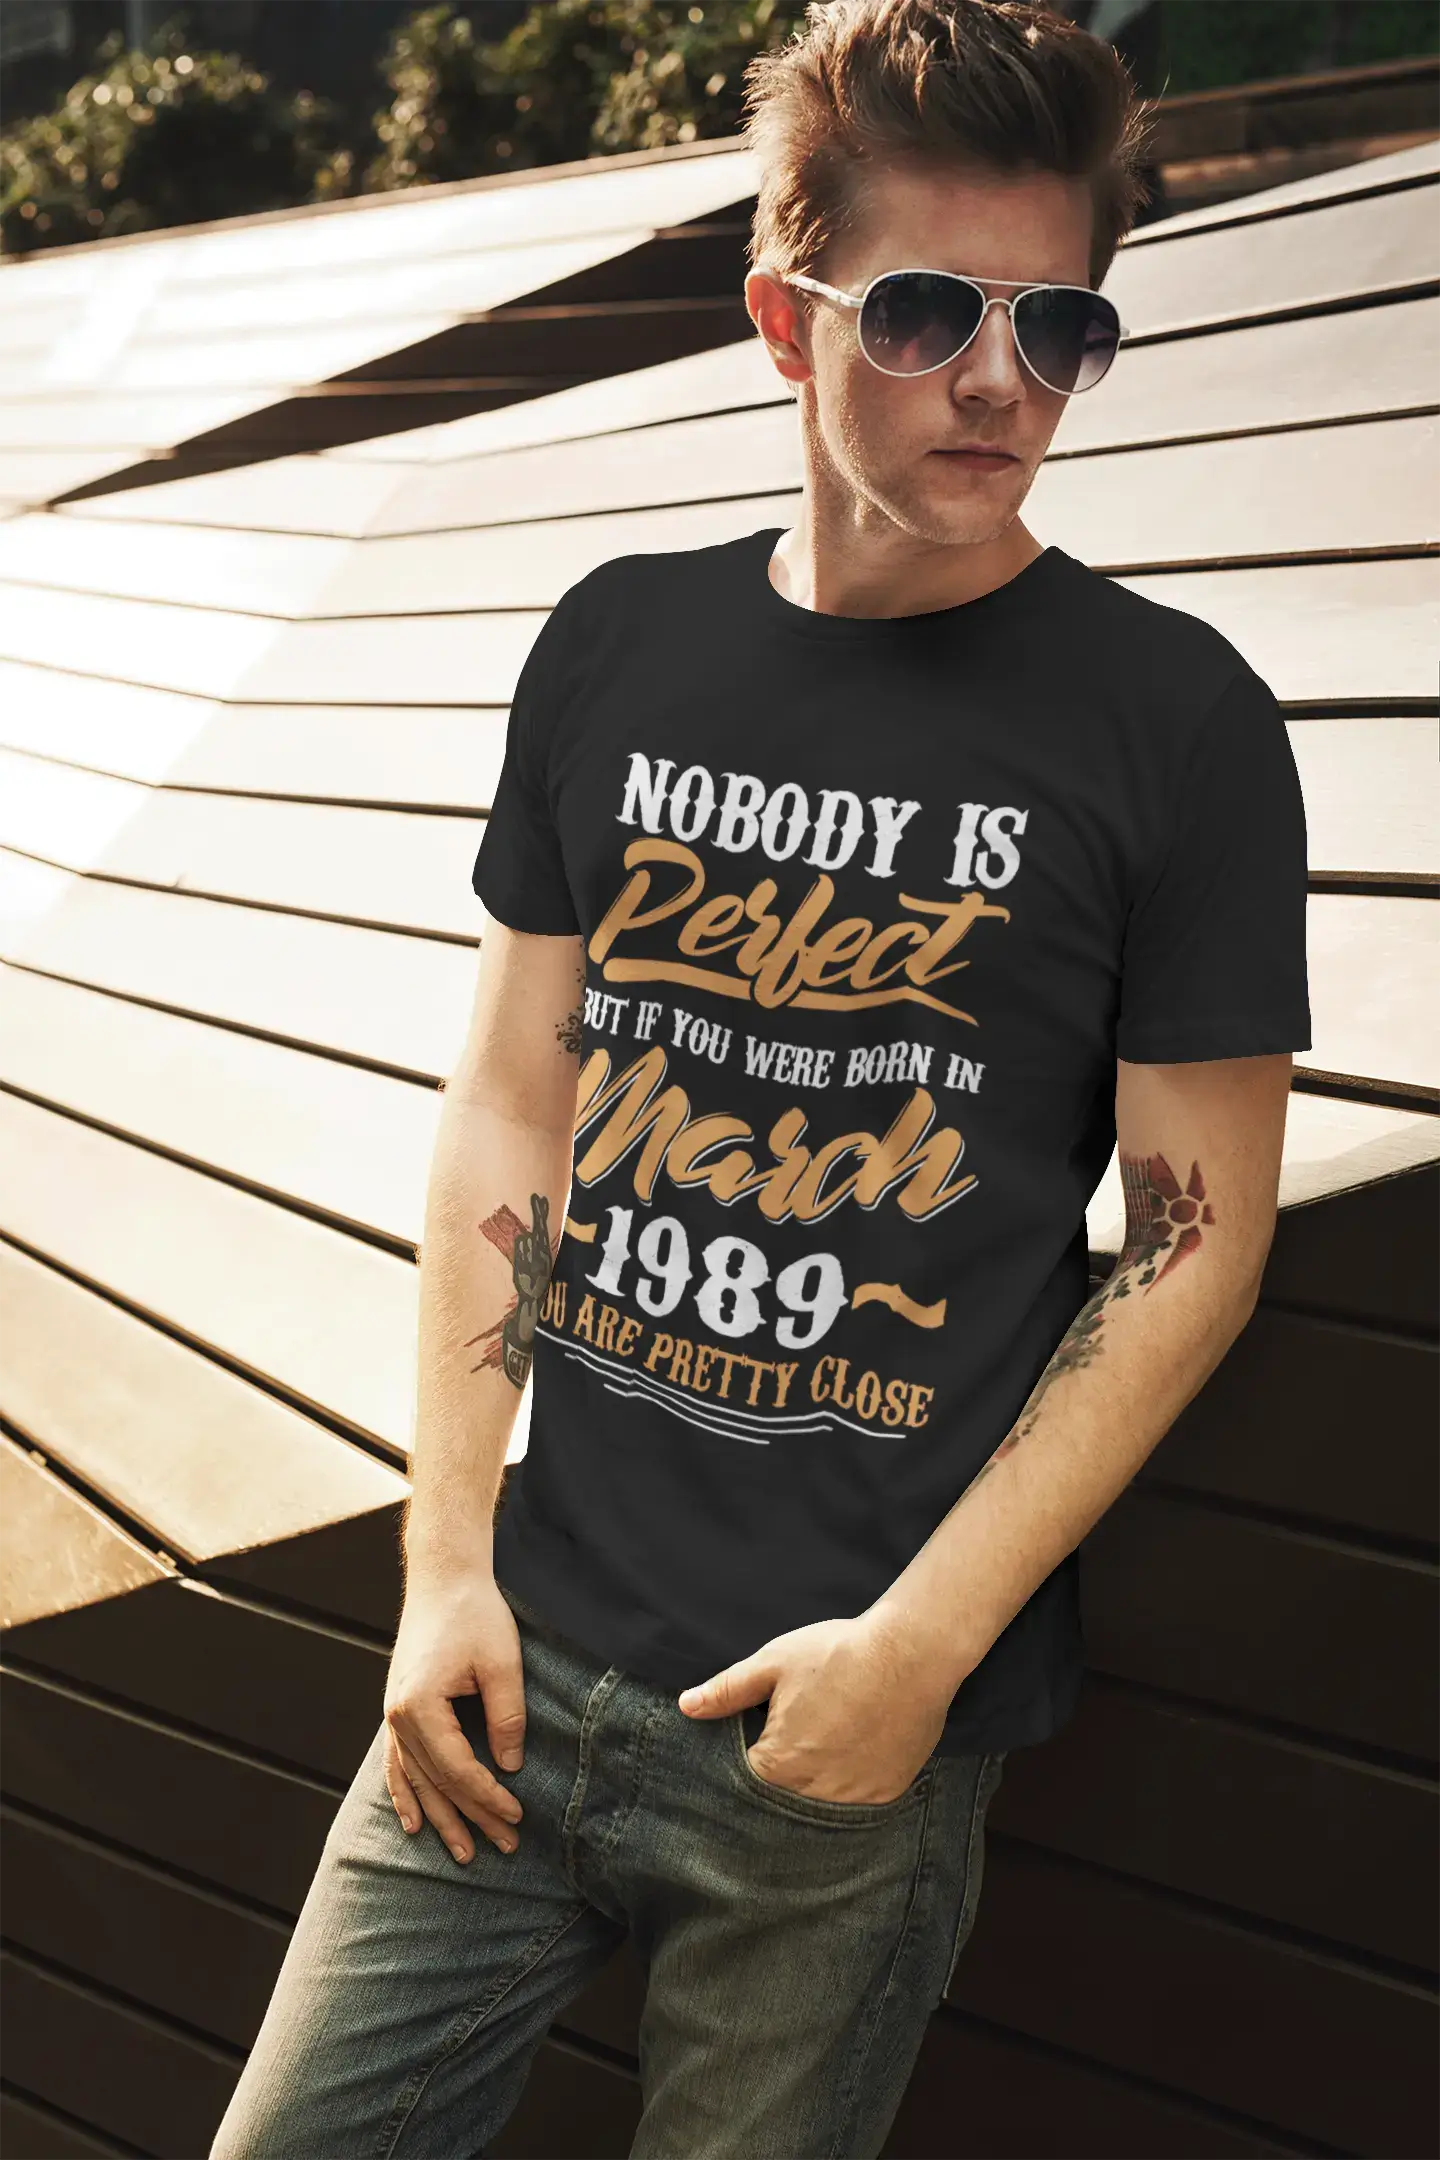 ULTRABASIC Men's T-Shirt Nobody is Perfect but If You are Born in March 1989 - Funny 32nd Birthday Gift Tee Shirt